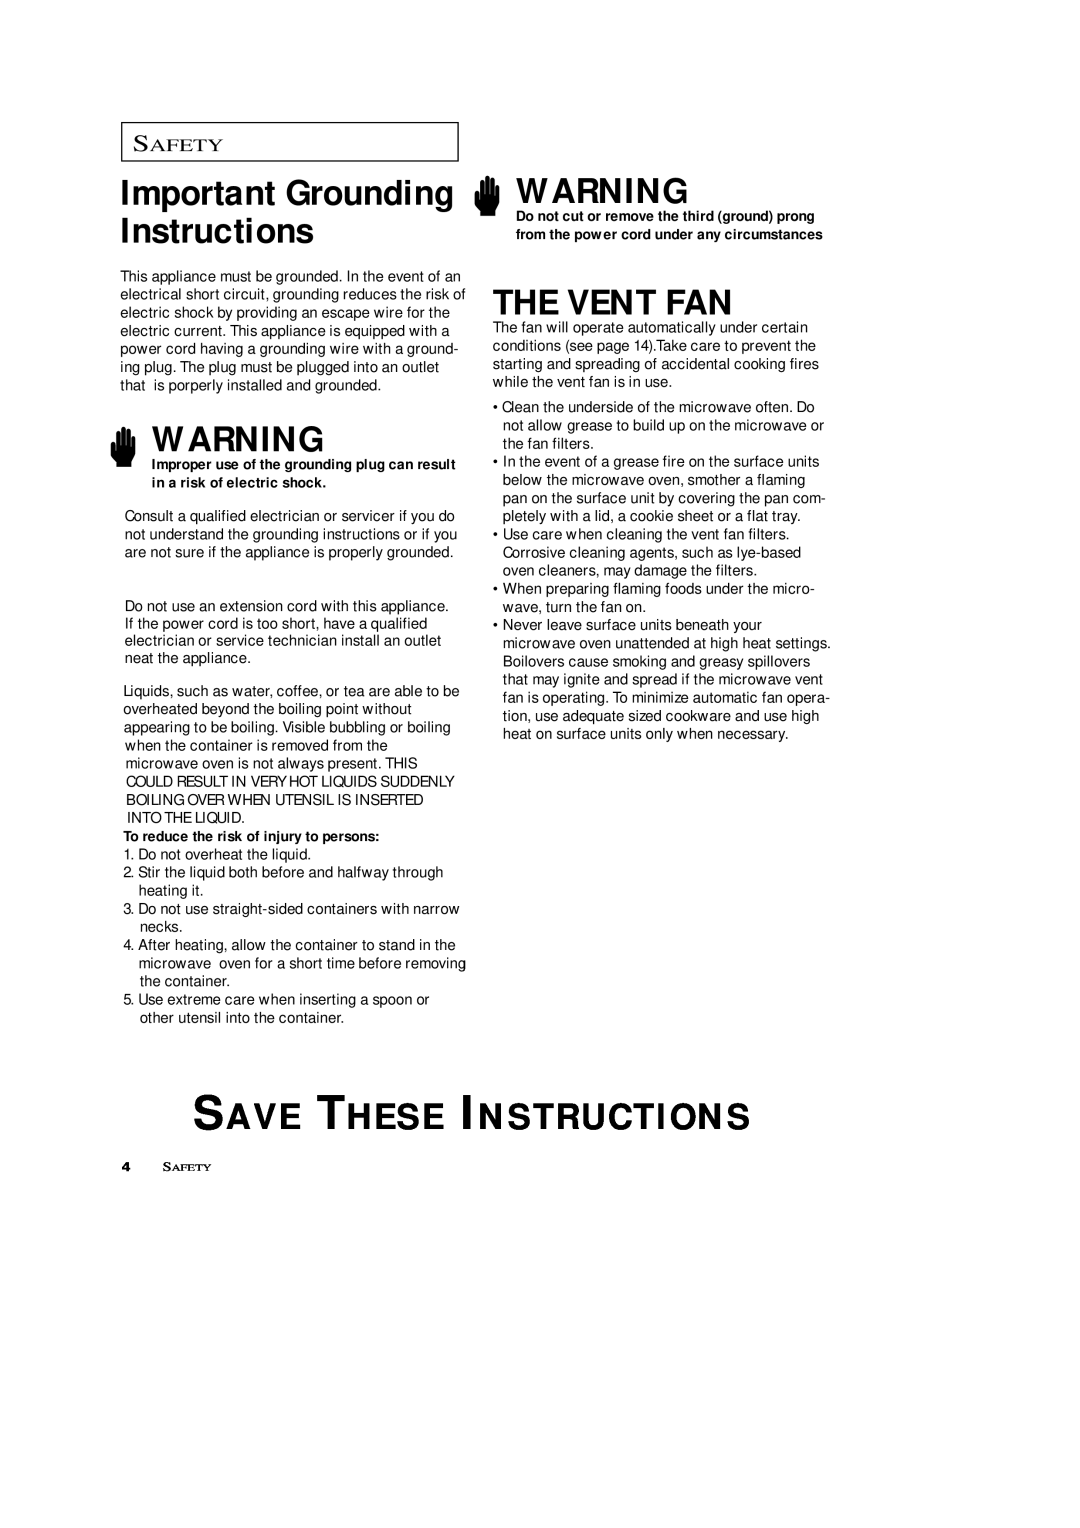 Samsung SRH1230ZG owner manual Save These Instructions, The Vent Fan, Important Grounding Instructions, Safety 